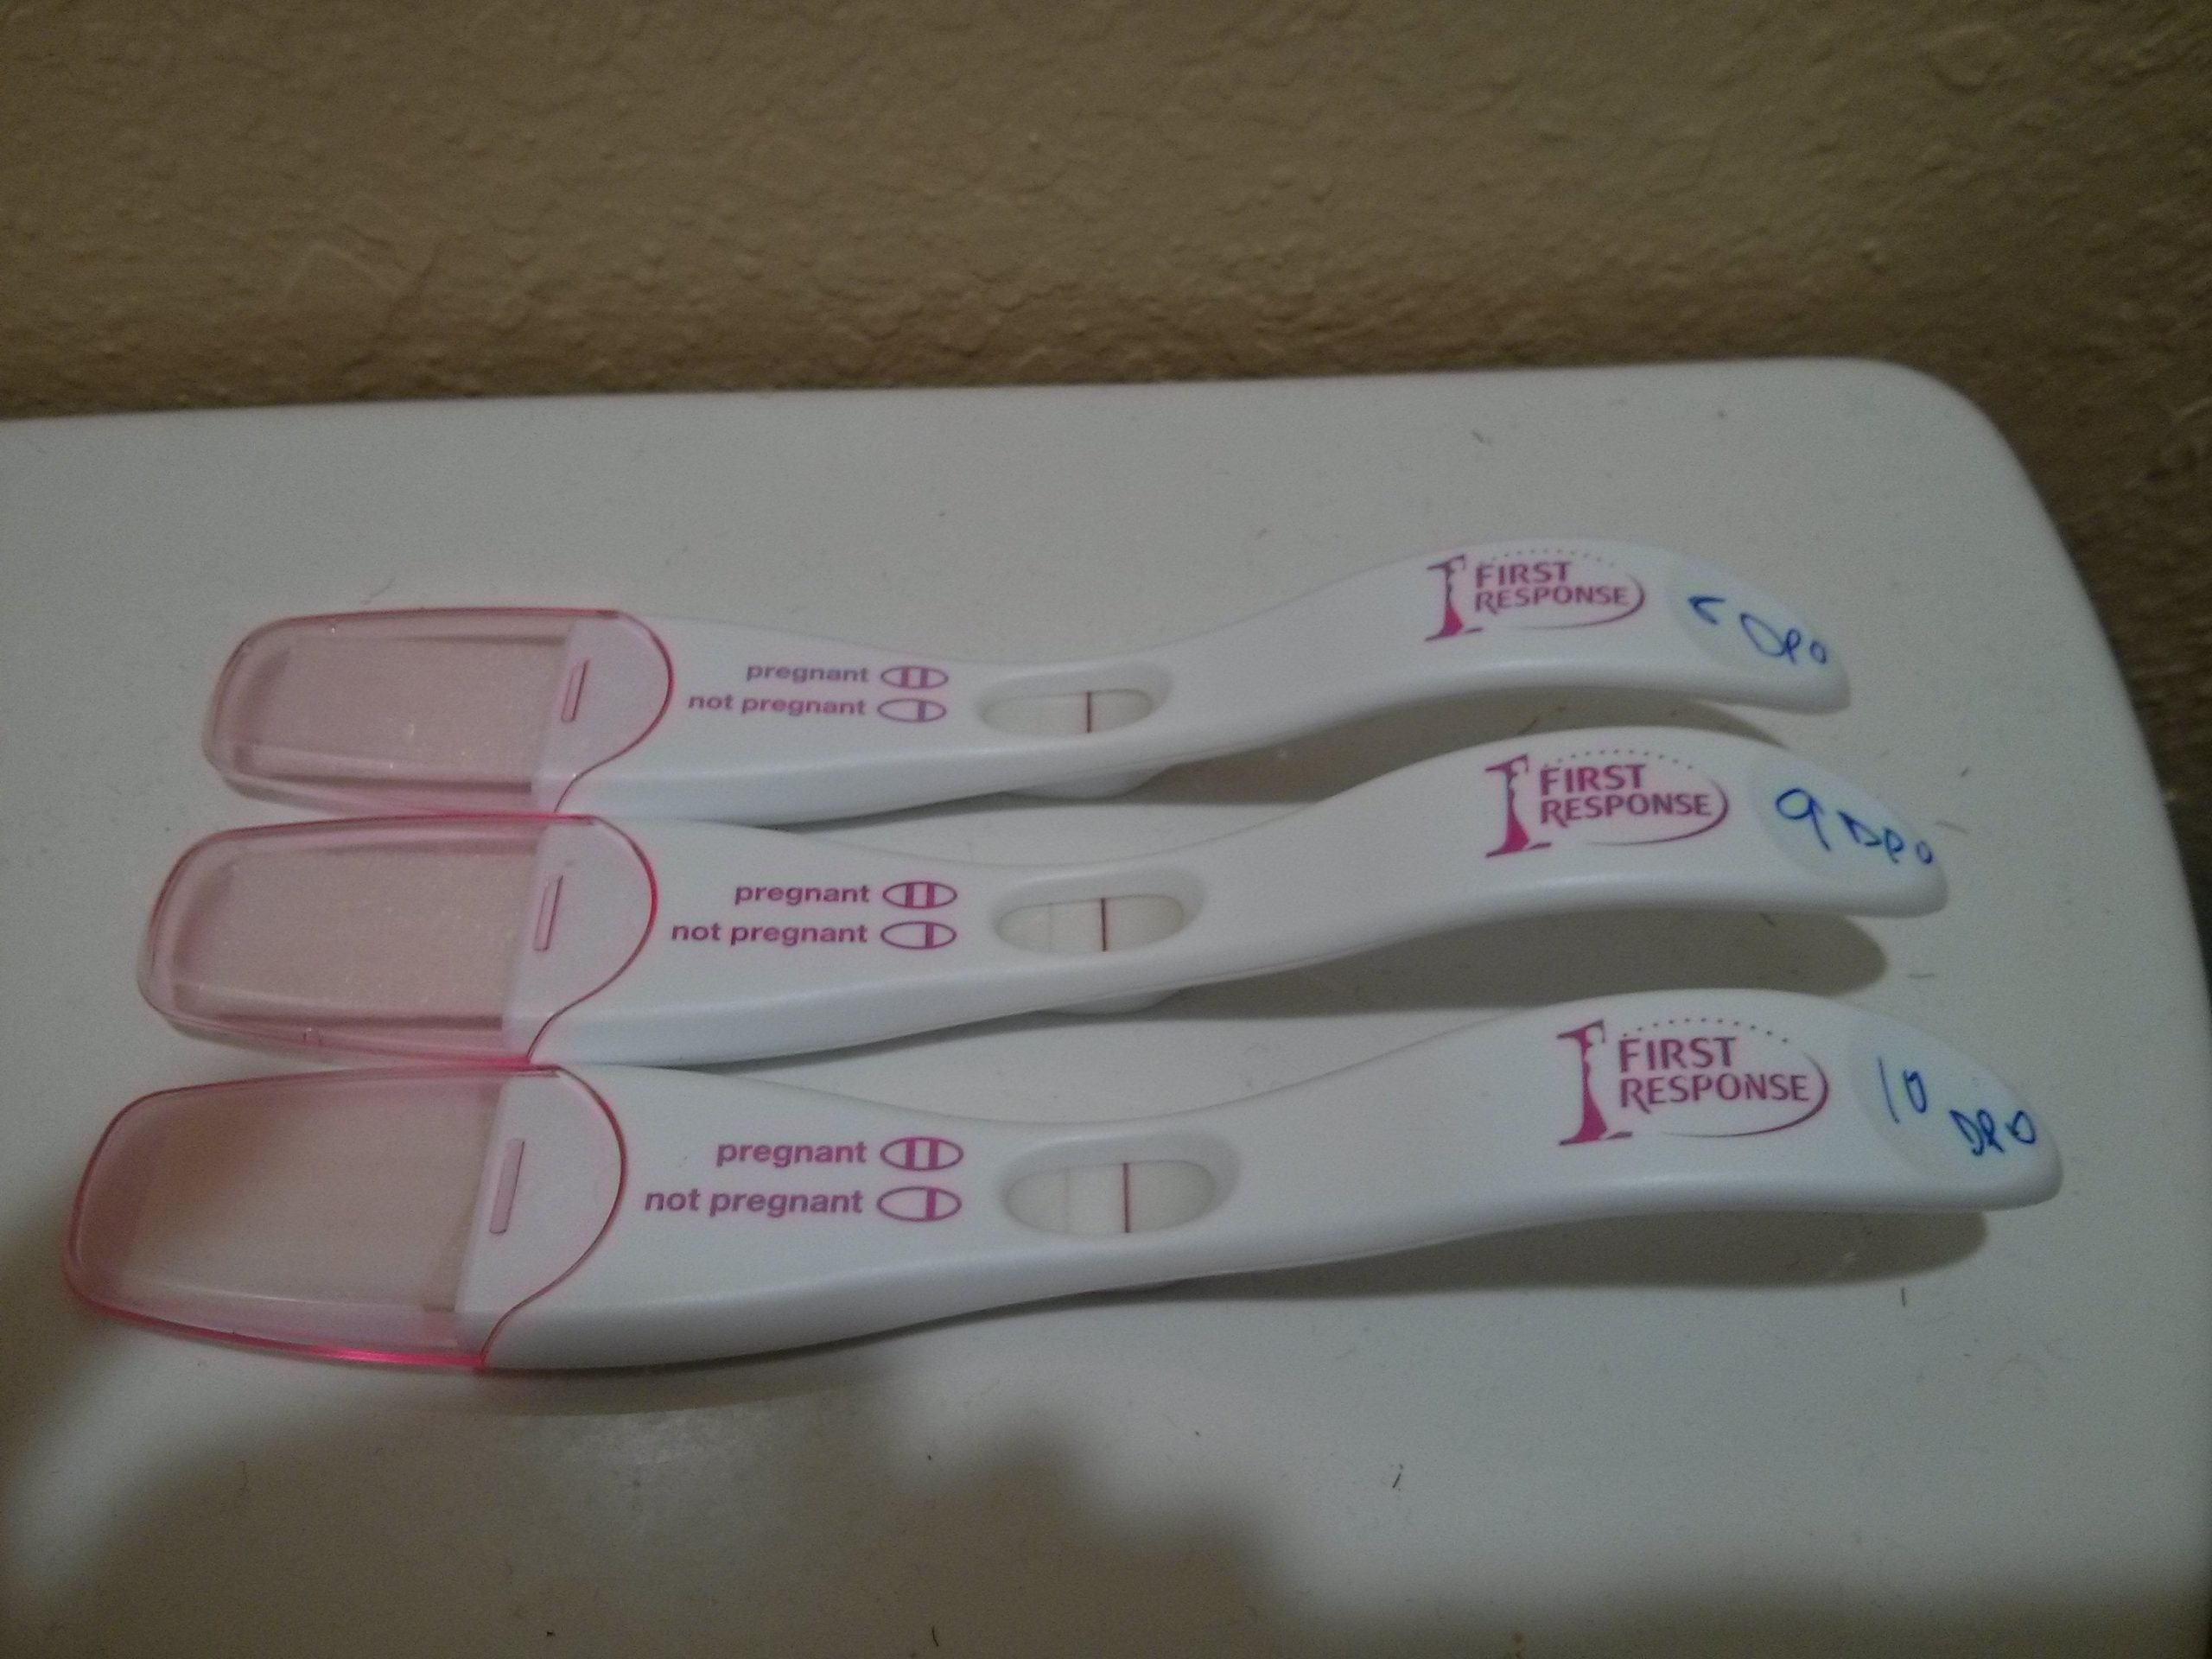 How often should I take a pregnancy test? My period is due ...